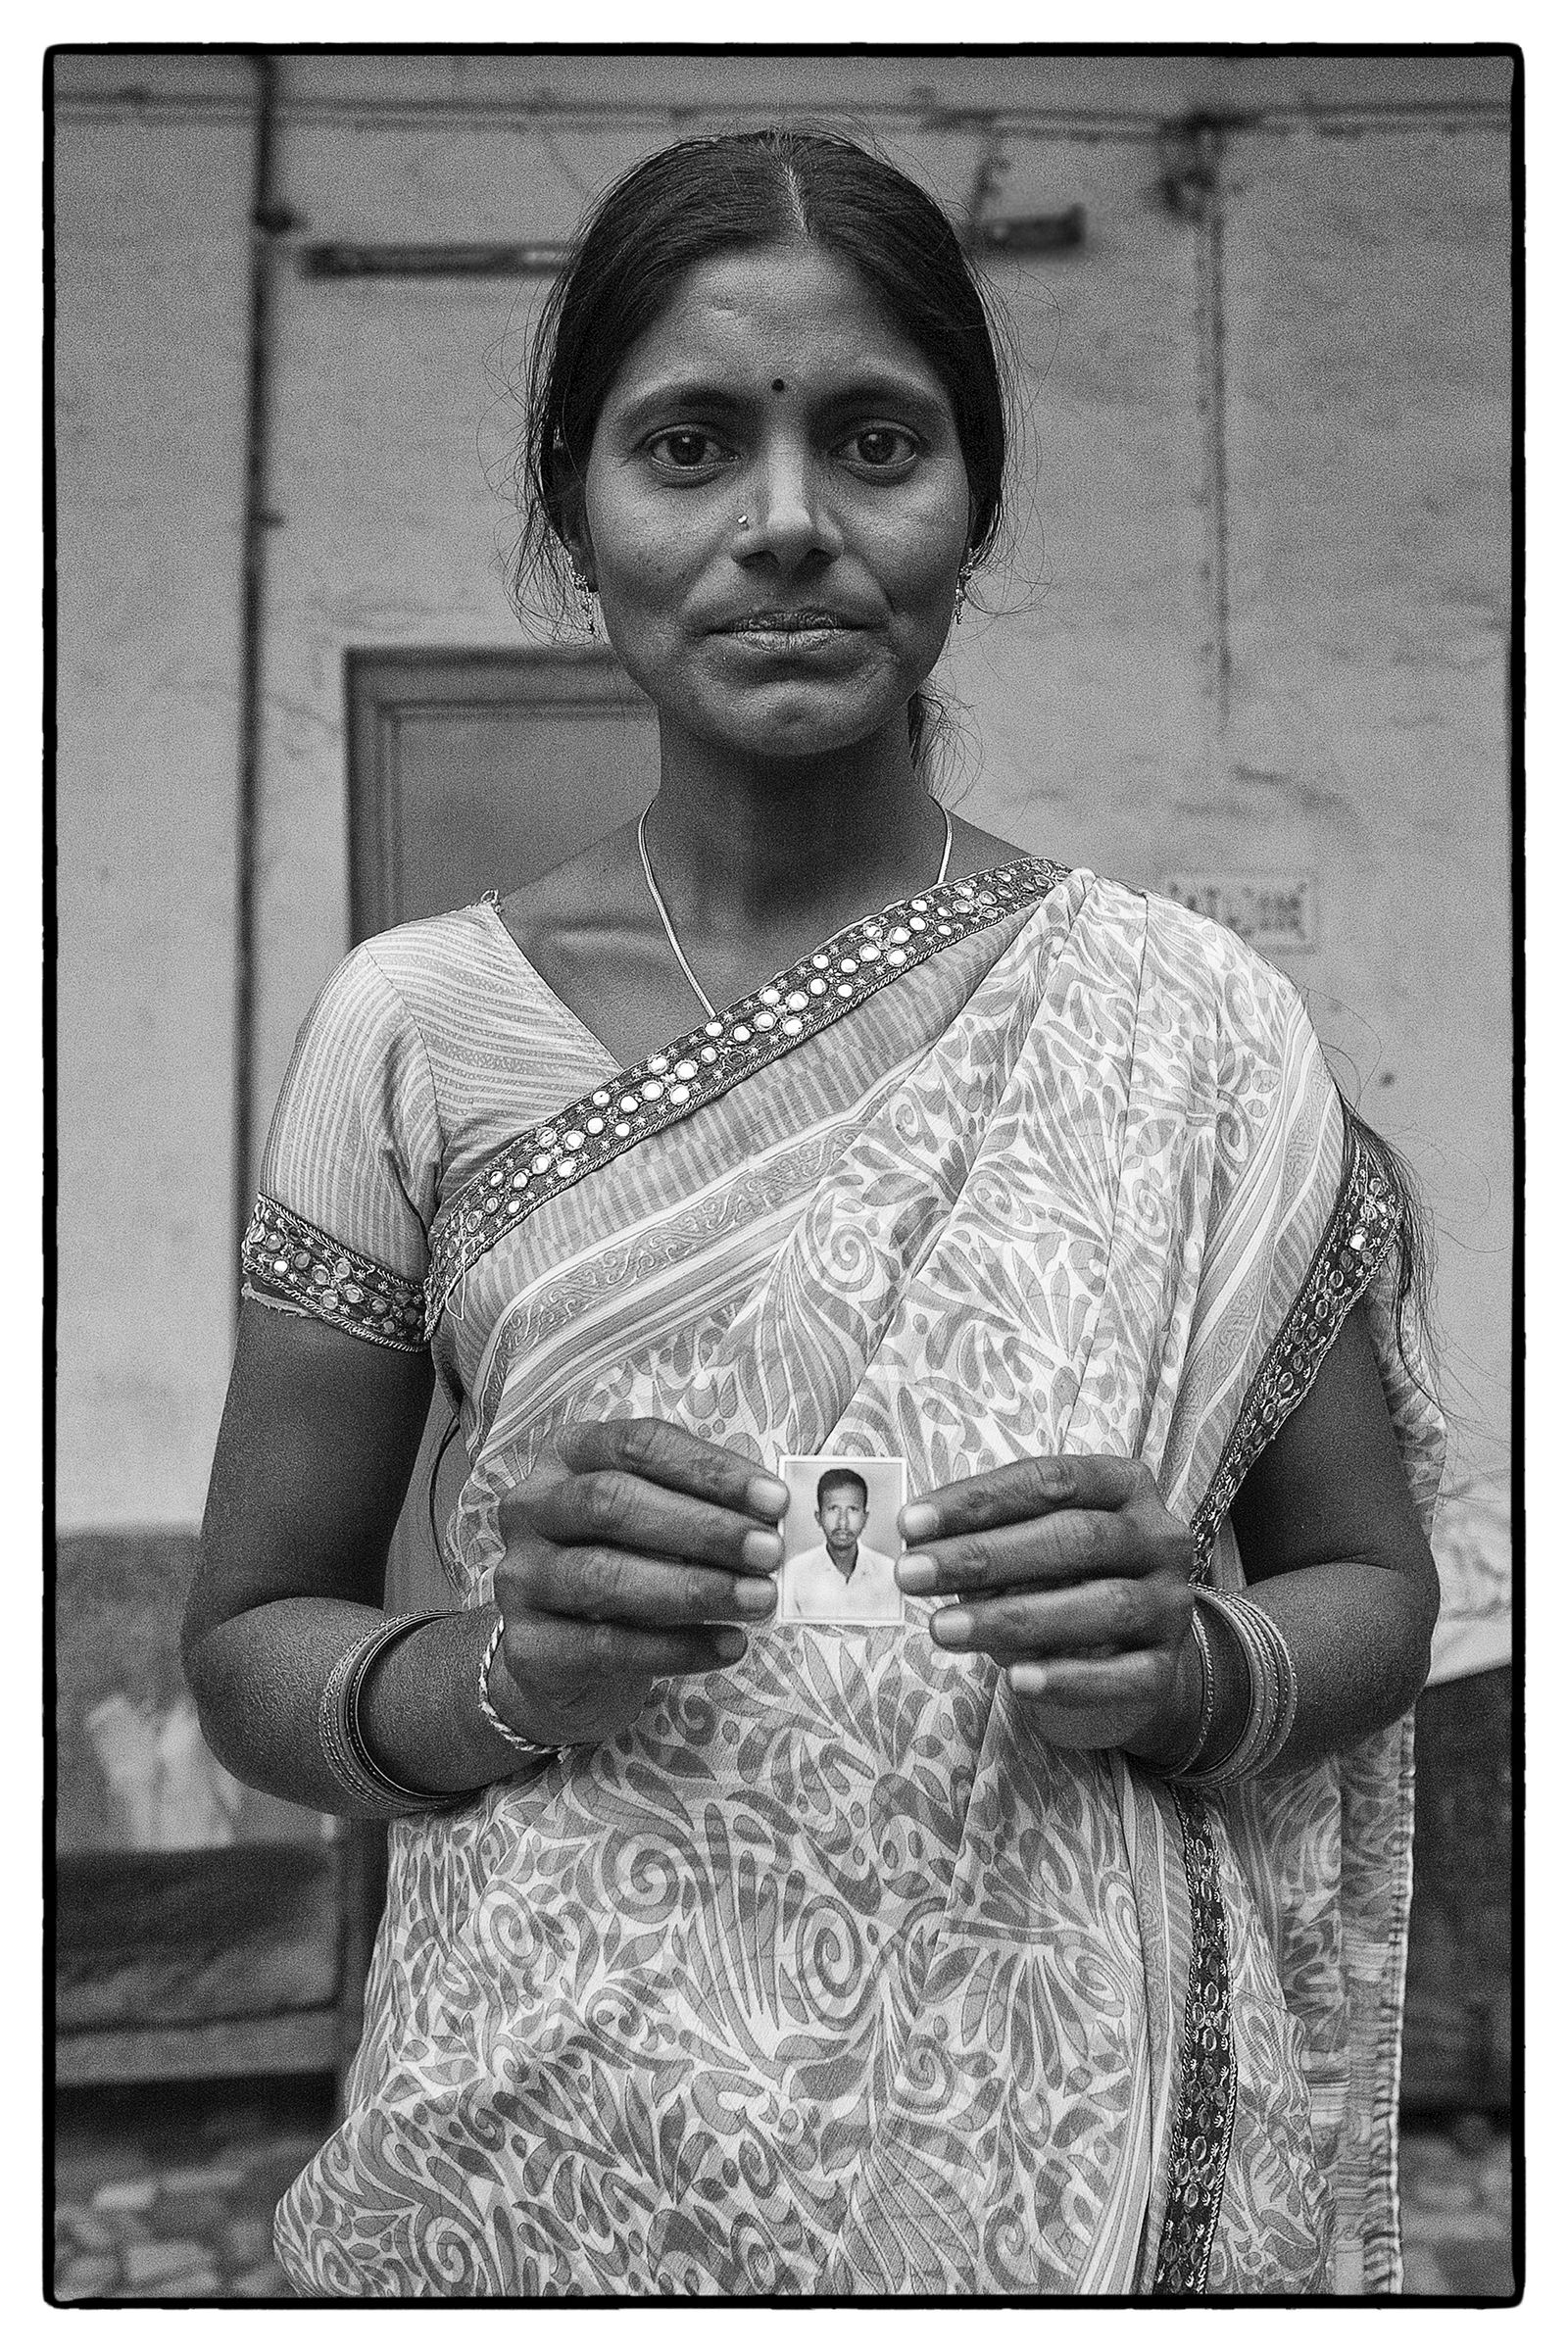 © Vijay S. Jodha - Image from the The First Witnesses photography project